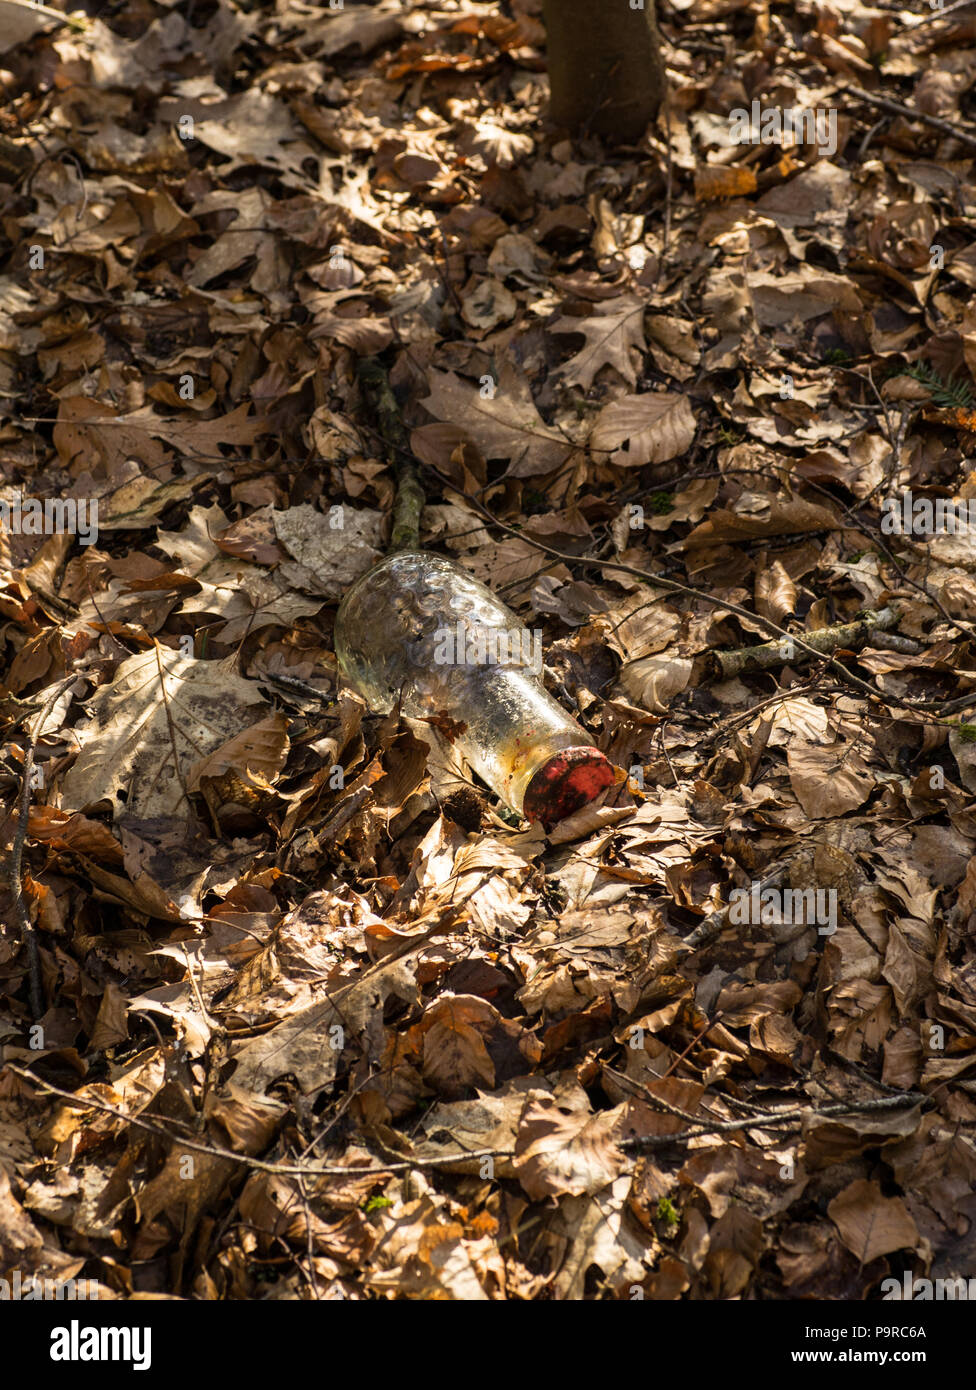 glass bottle, garbage thrown into the forest's leaf-covered bottom, environmental mess Stock Photo